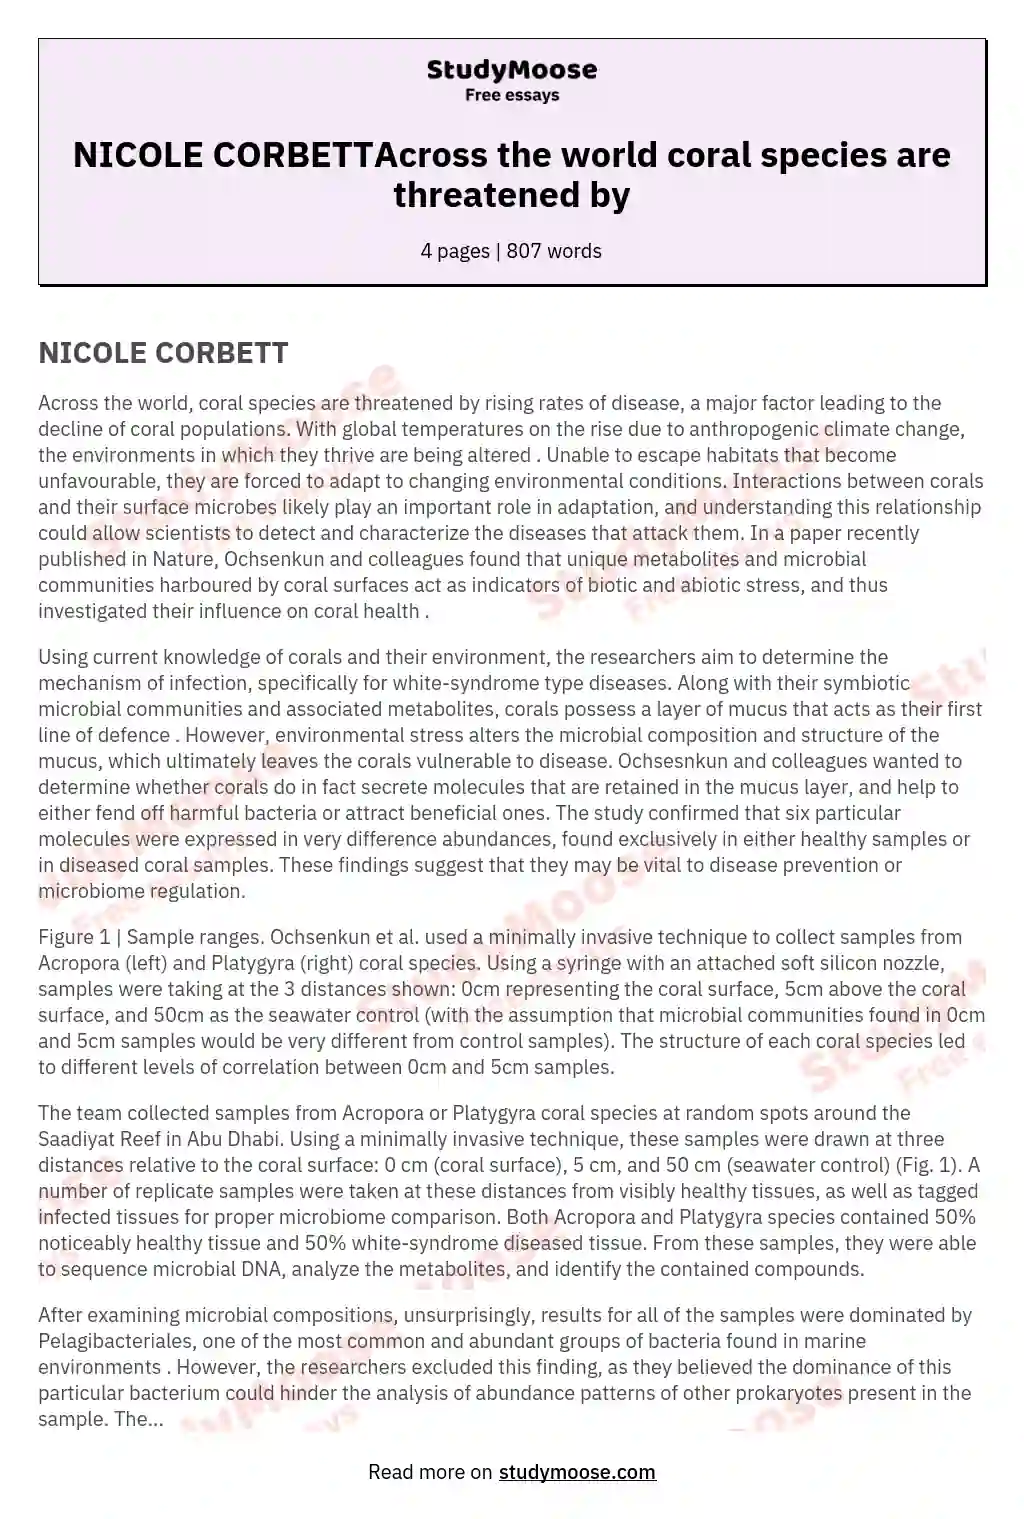 NICOLE CORBETTAcross the world coral species are threatened by essay